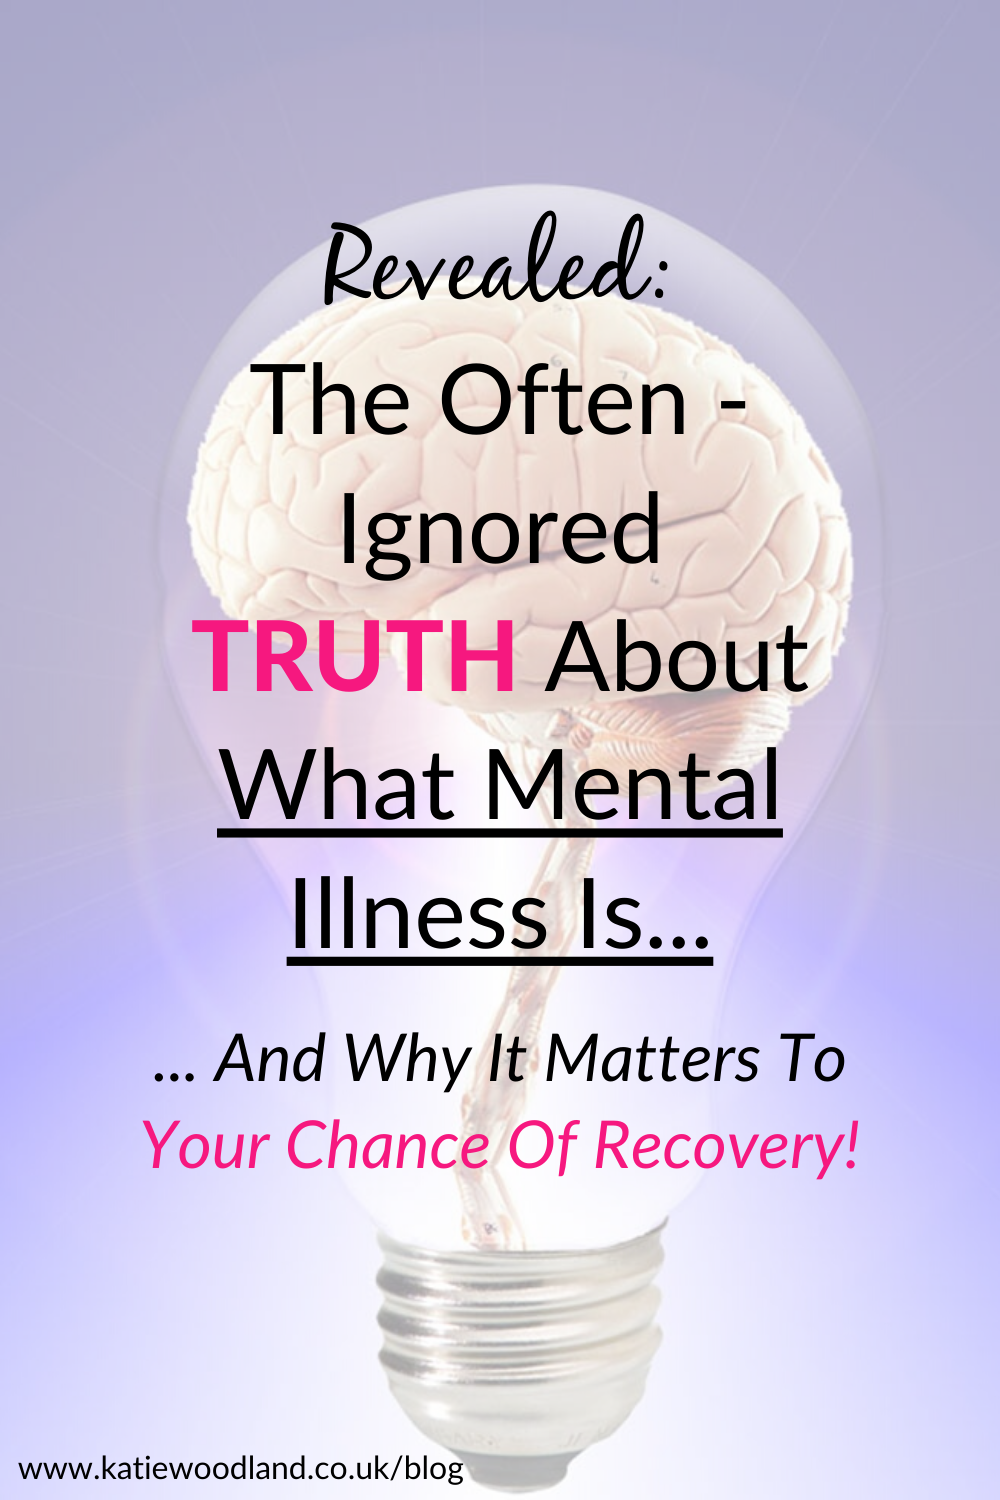 The Often-Ignored TRUTH About What Mental Health Is & Why It Matters To Your Chance Of Recovery